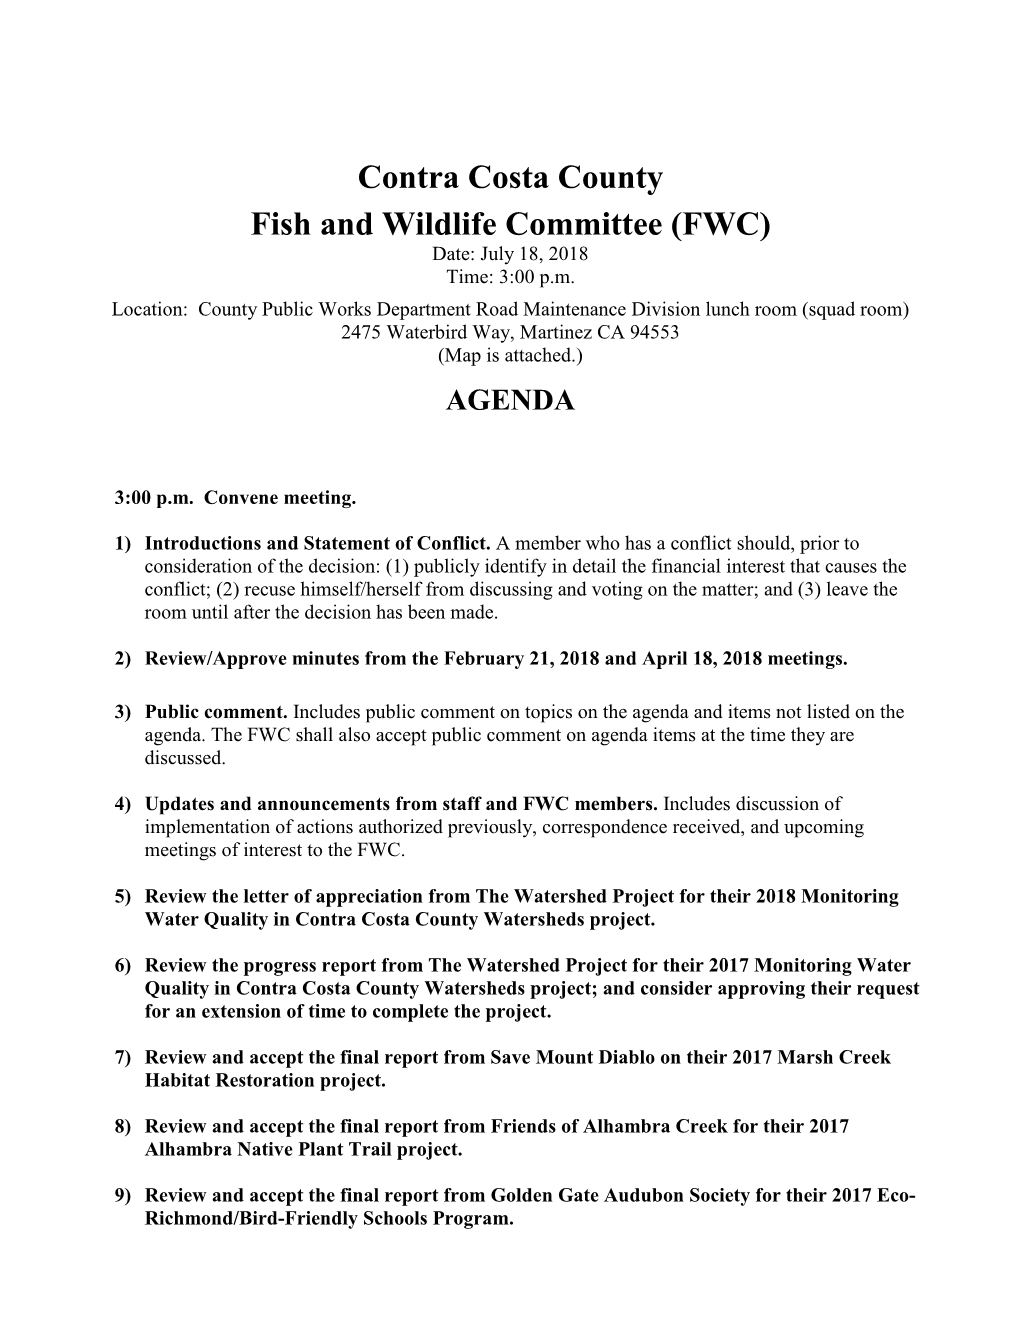 Contra Costa County Fish and Wildlife Committee (FWC) Date: July 18, 2018 Time: 3:00 P.M